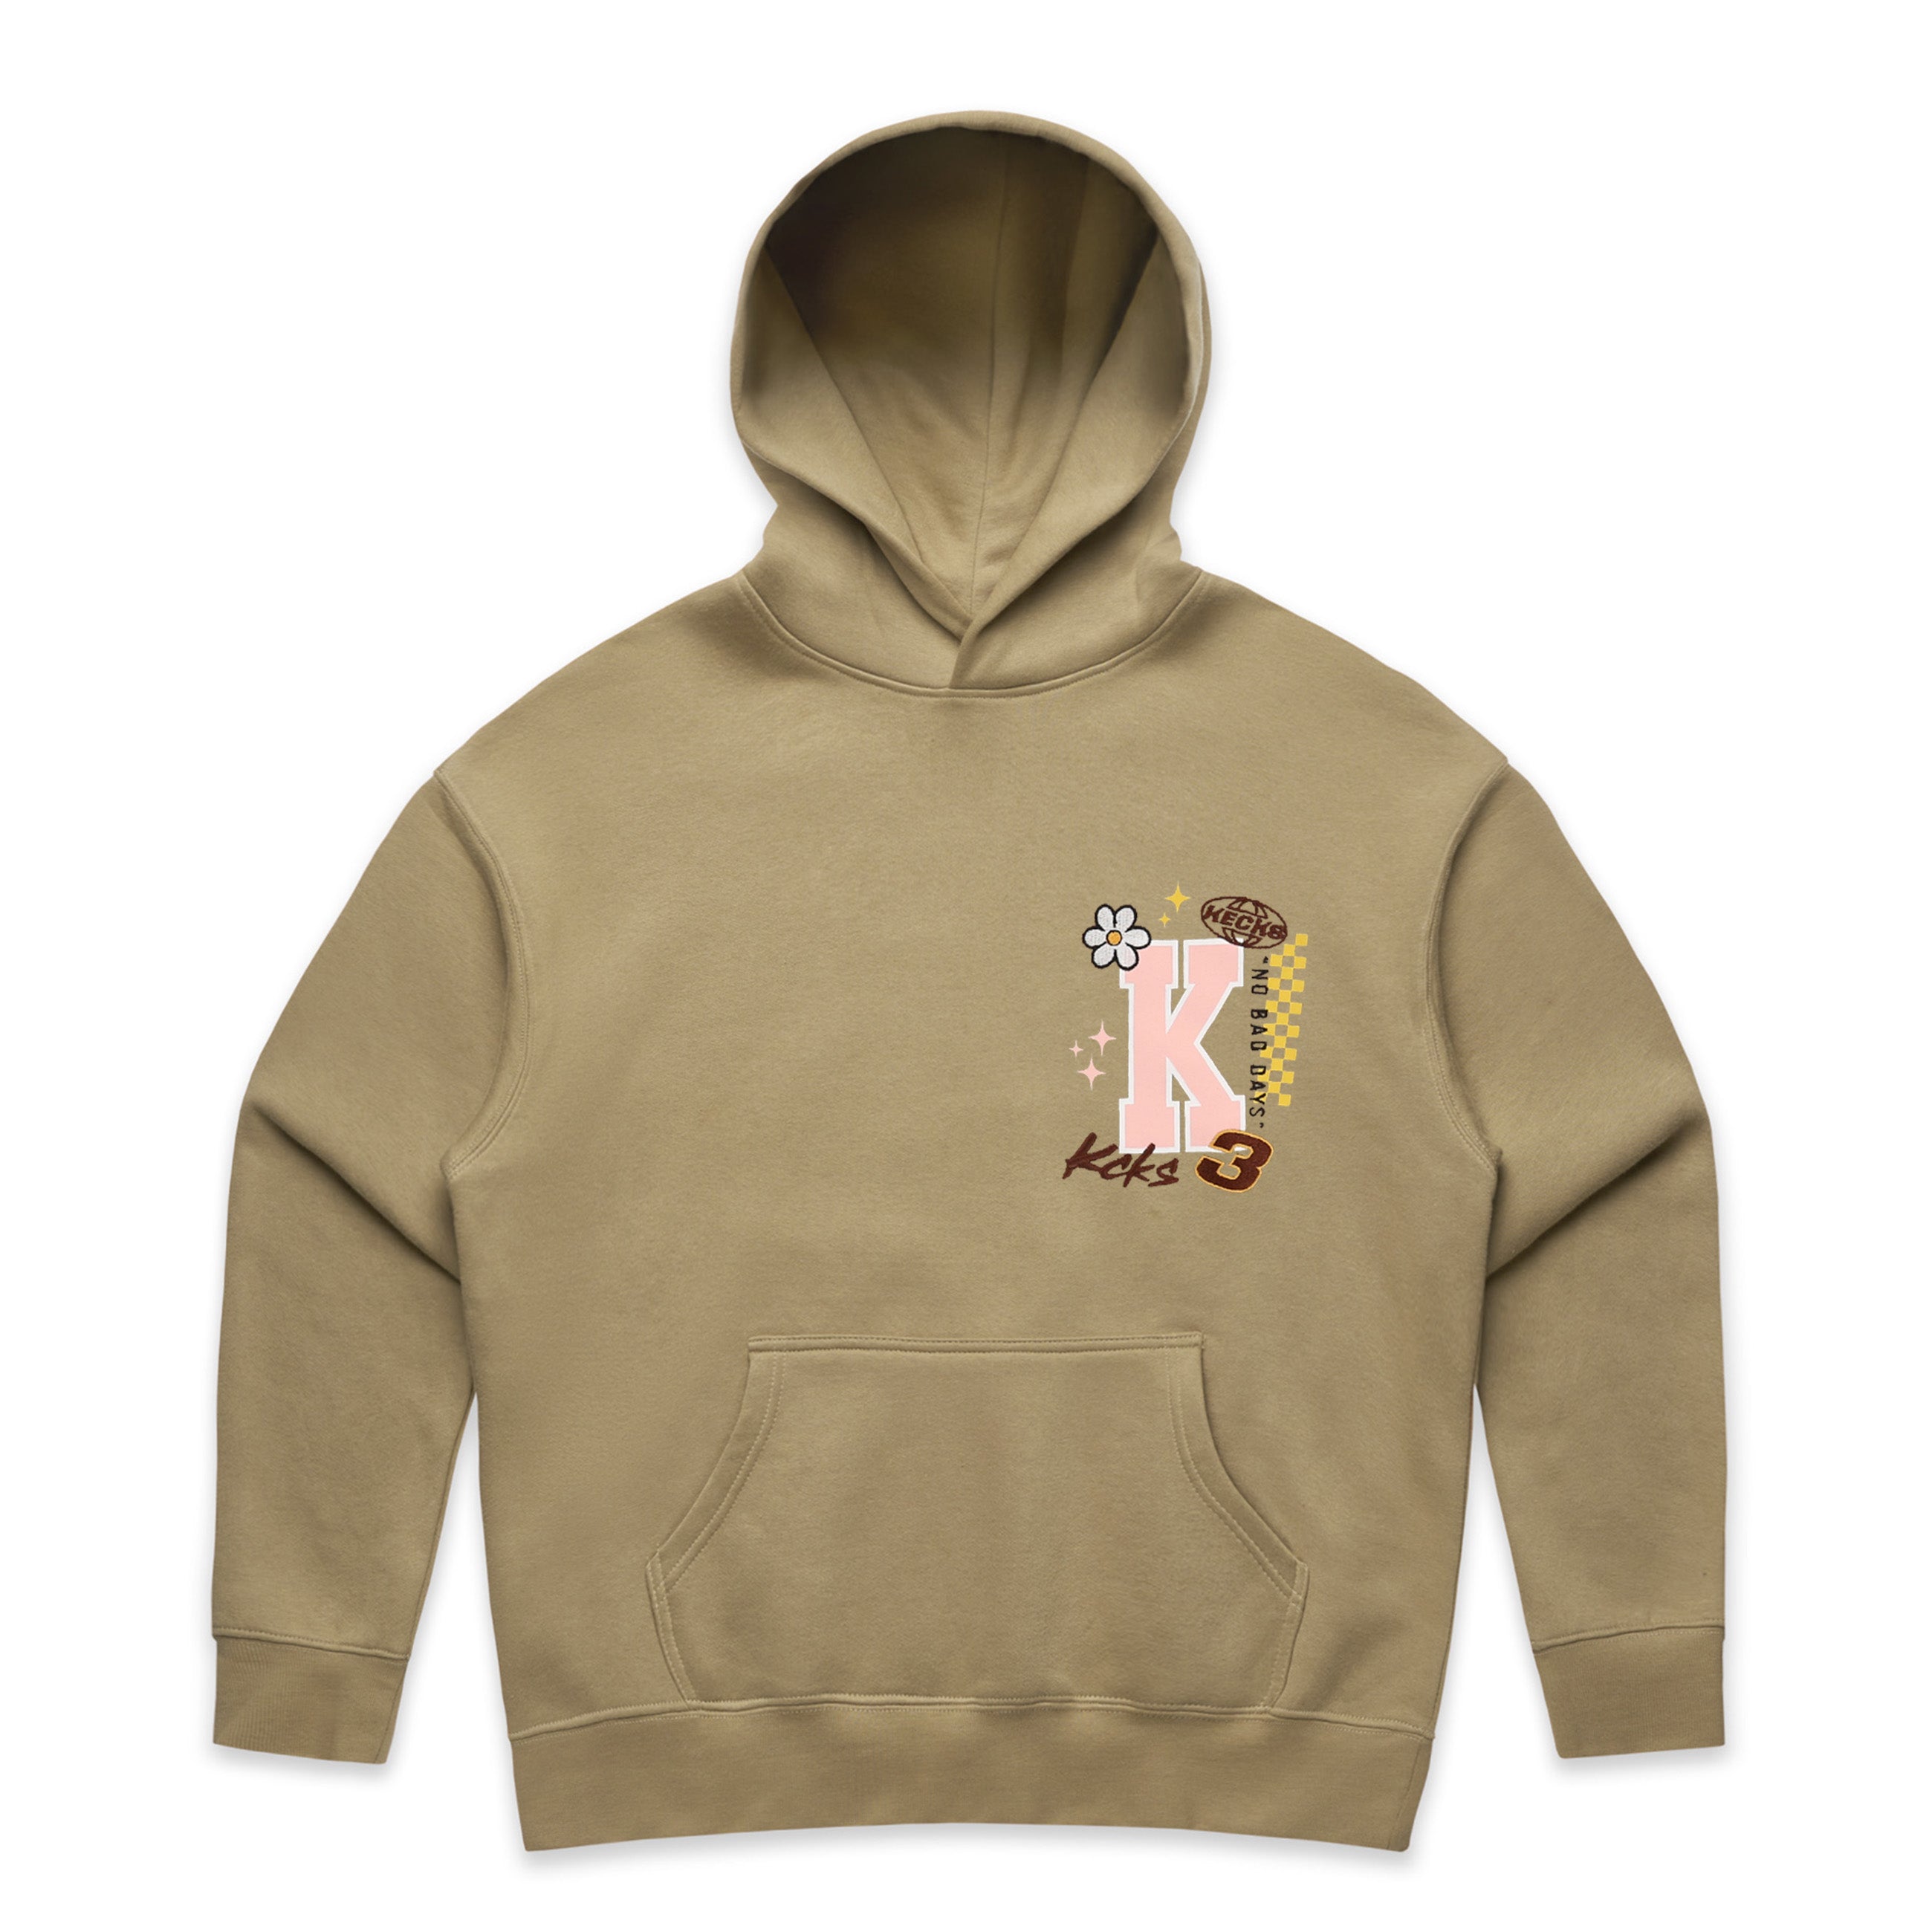 Track Relax Hoodie